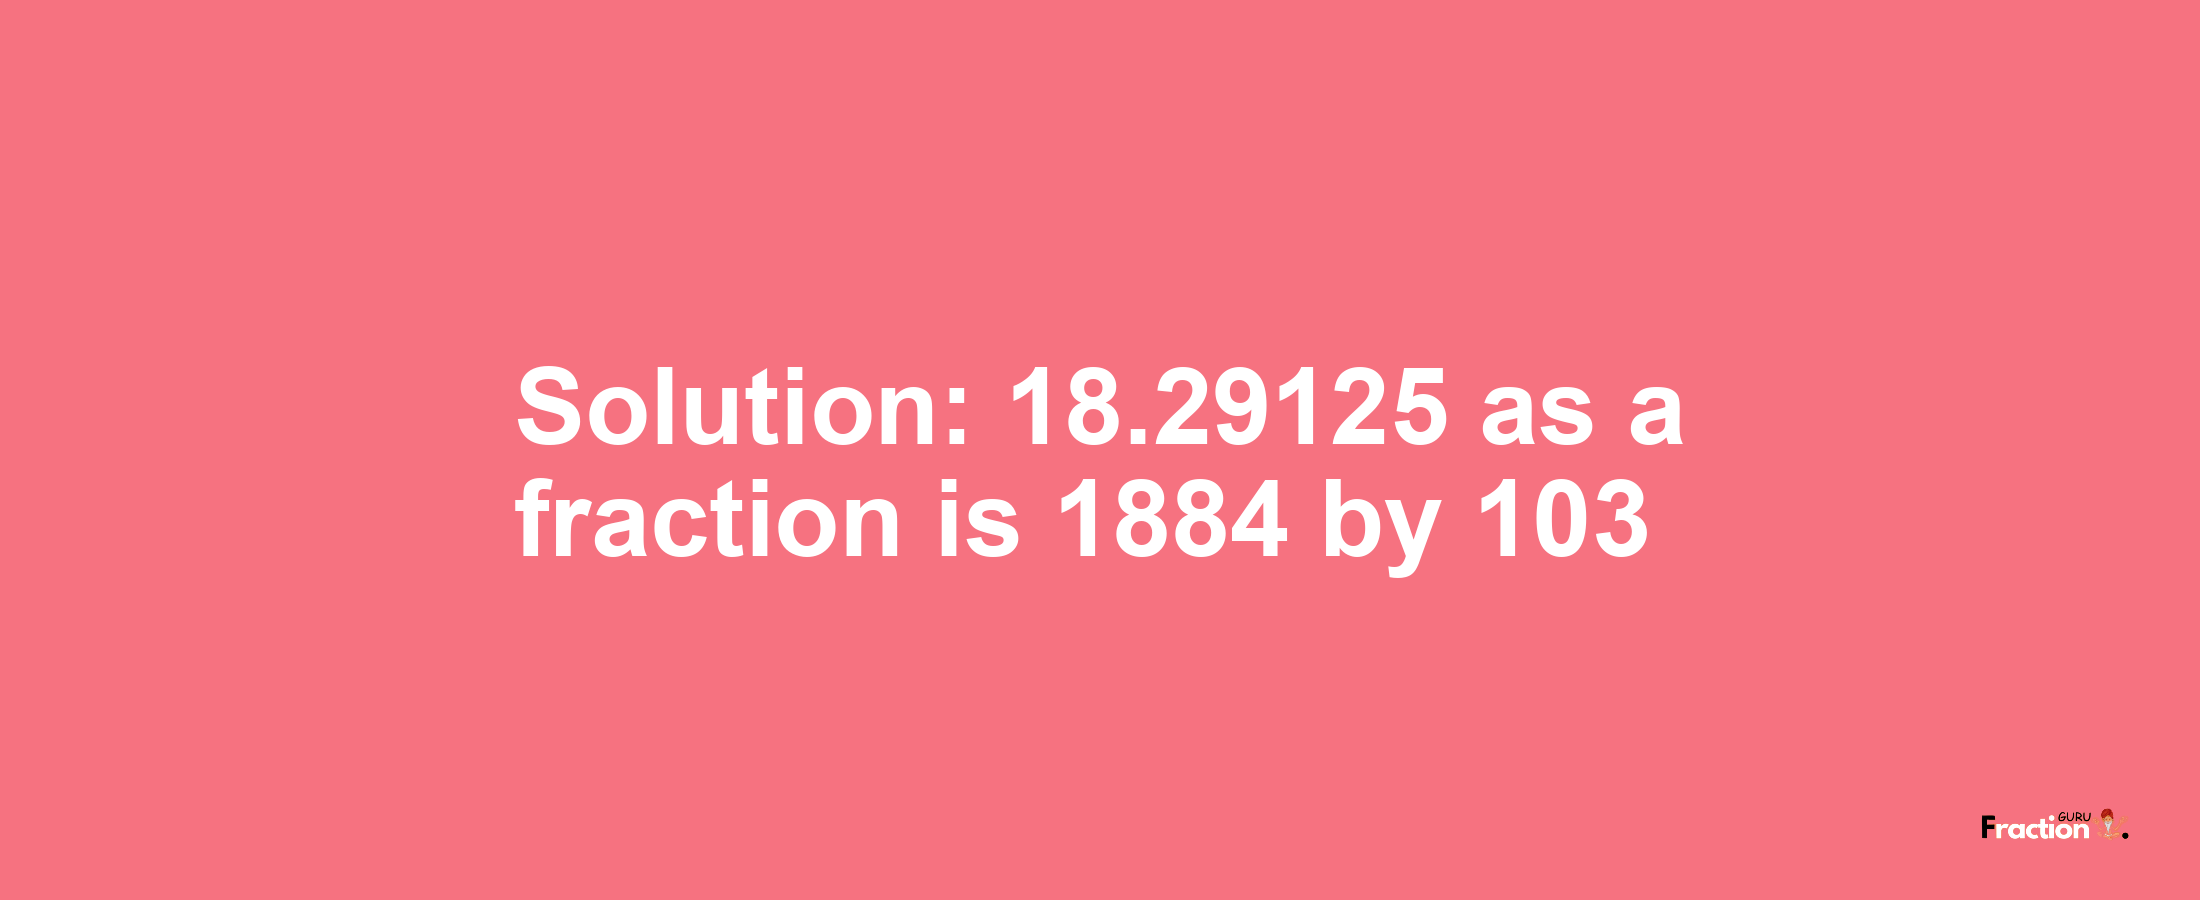 Solution:18.29125 as a fraction is 1884/103